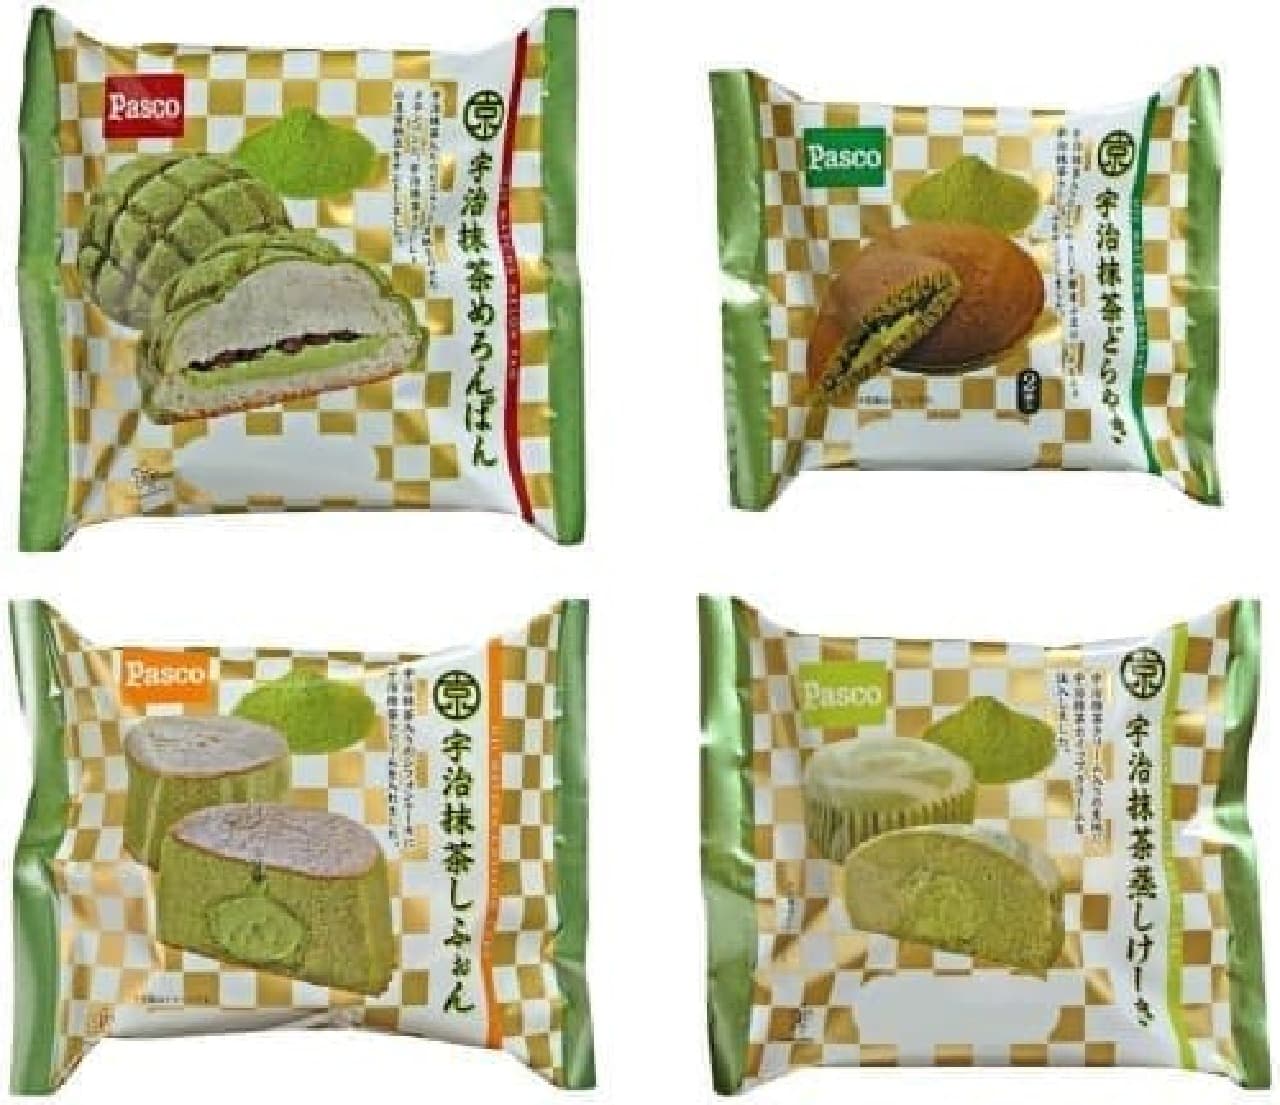 4 products to enjoy the "Japanese" flavor of Uji matcha (Source: Pasco official website)